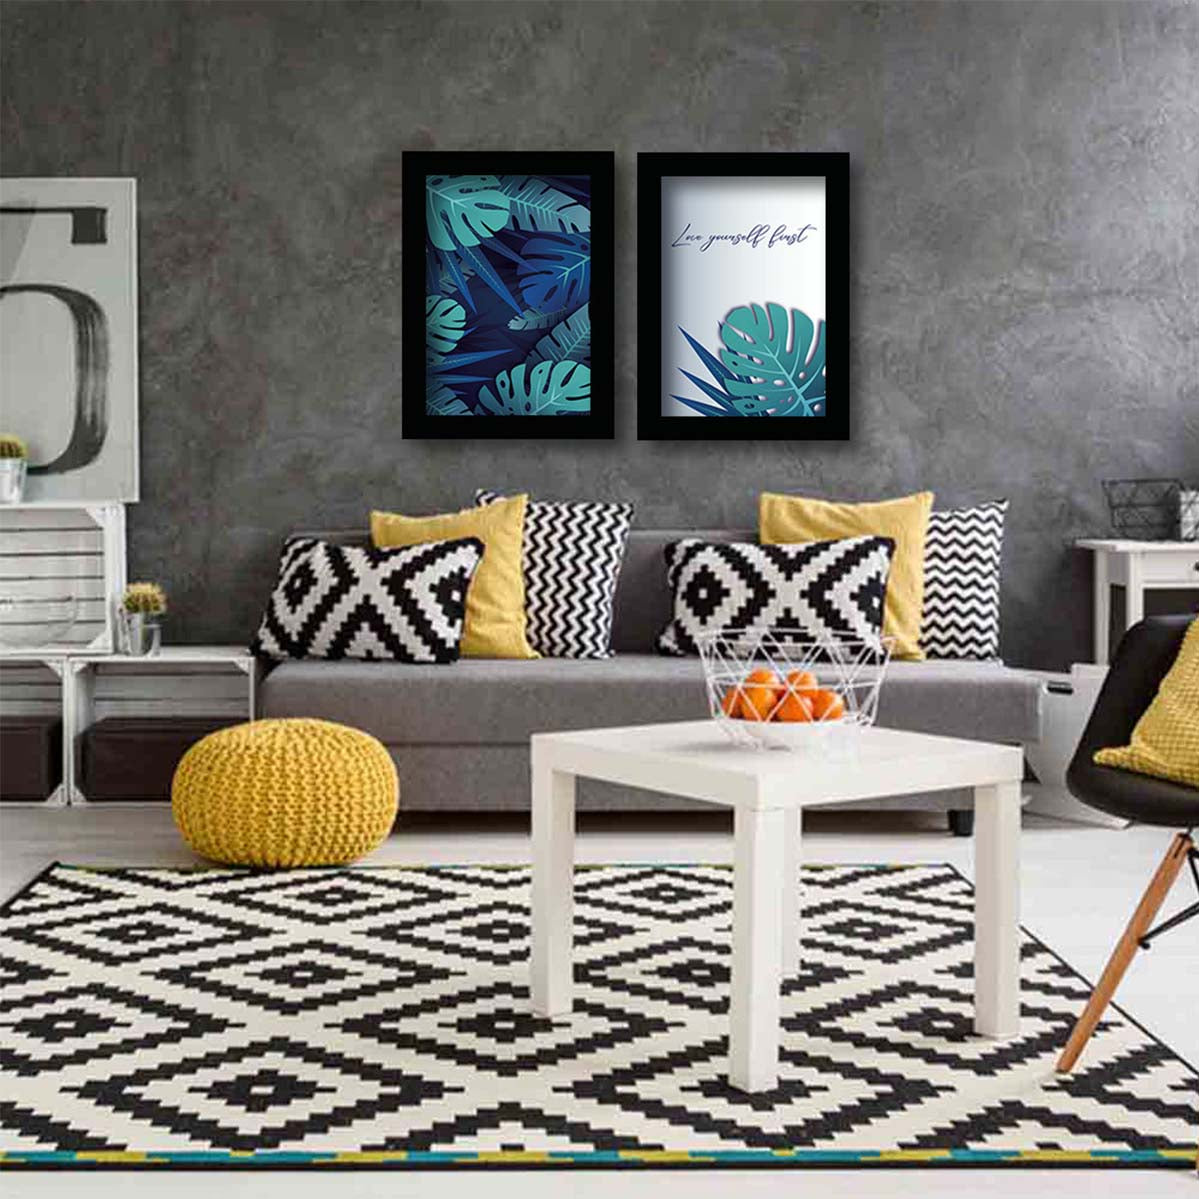 Modern Art Framed Wall Painting Poster for Living room Bedroom Office Gifts Home Decoration Set Of 2